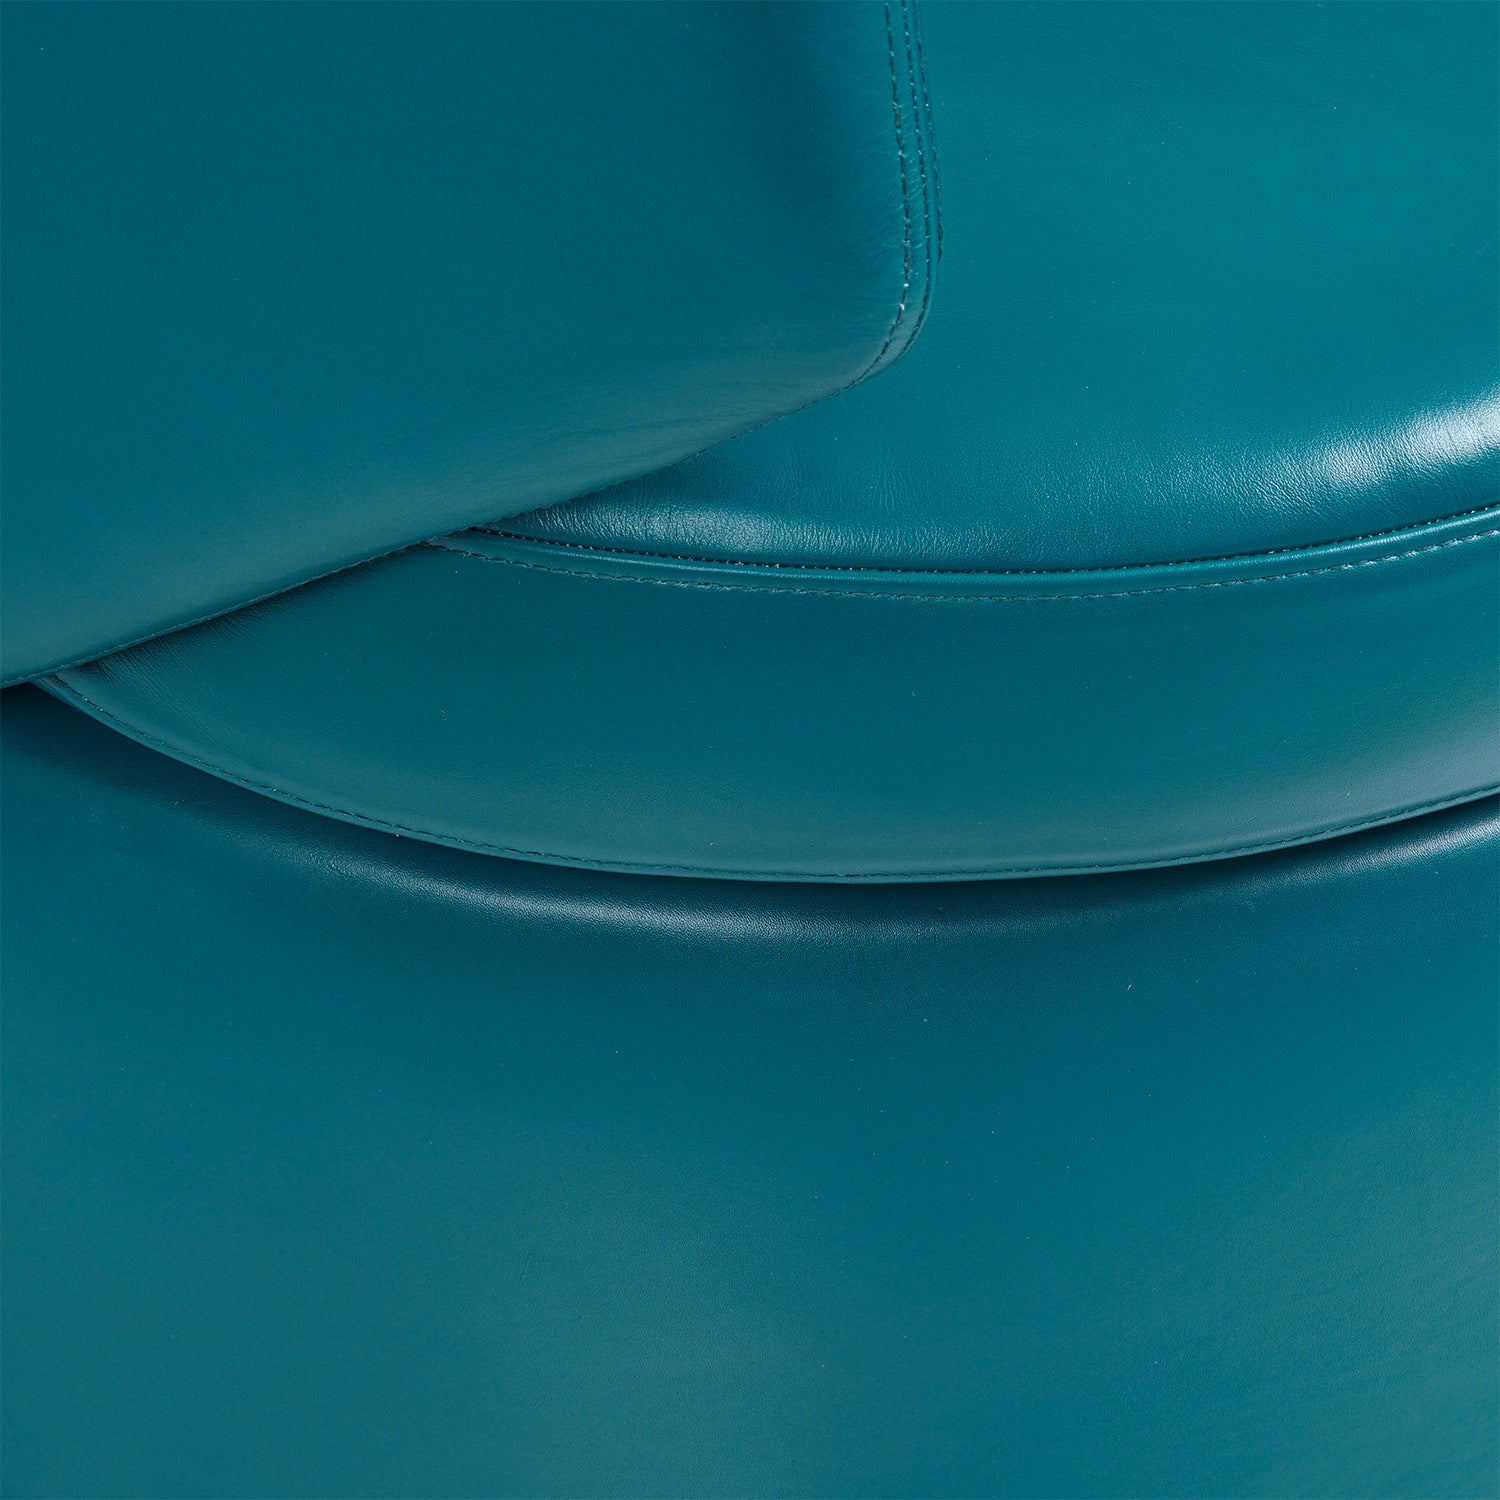 Juliet Sapi Leather Chair Teal Seat Cushion Close Up